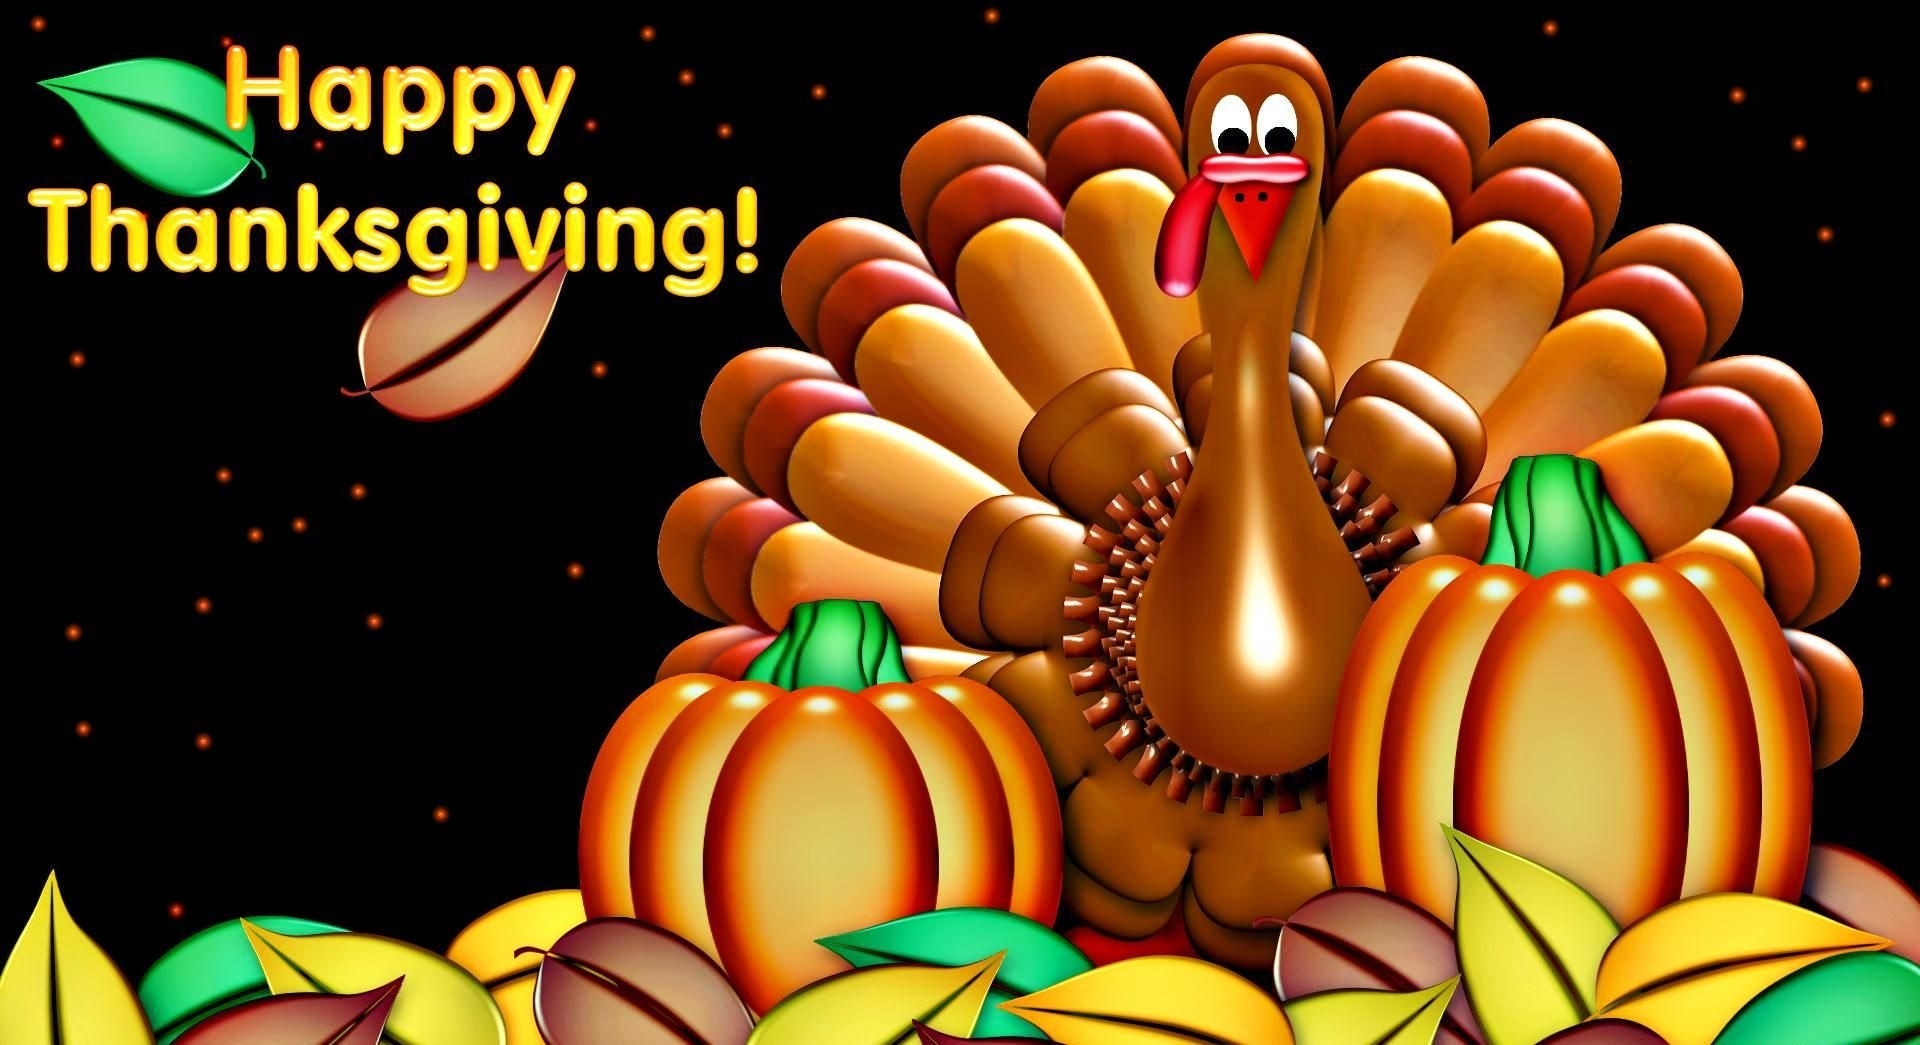 10 Most Popular Free Thanksgiving Screensavers Wallpaper FULL HD 1080p For PC Background